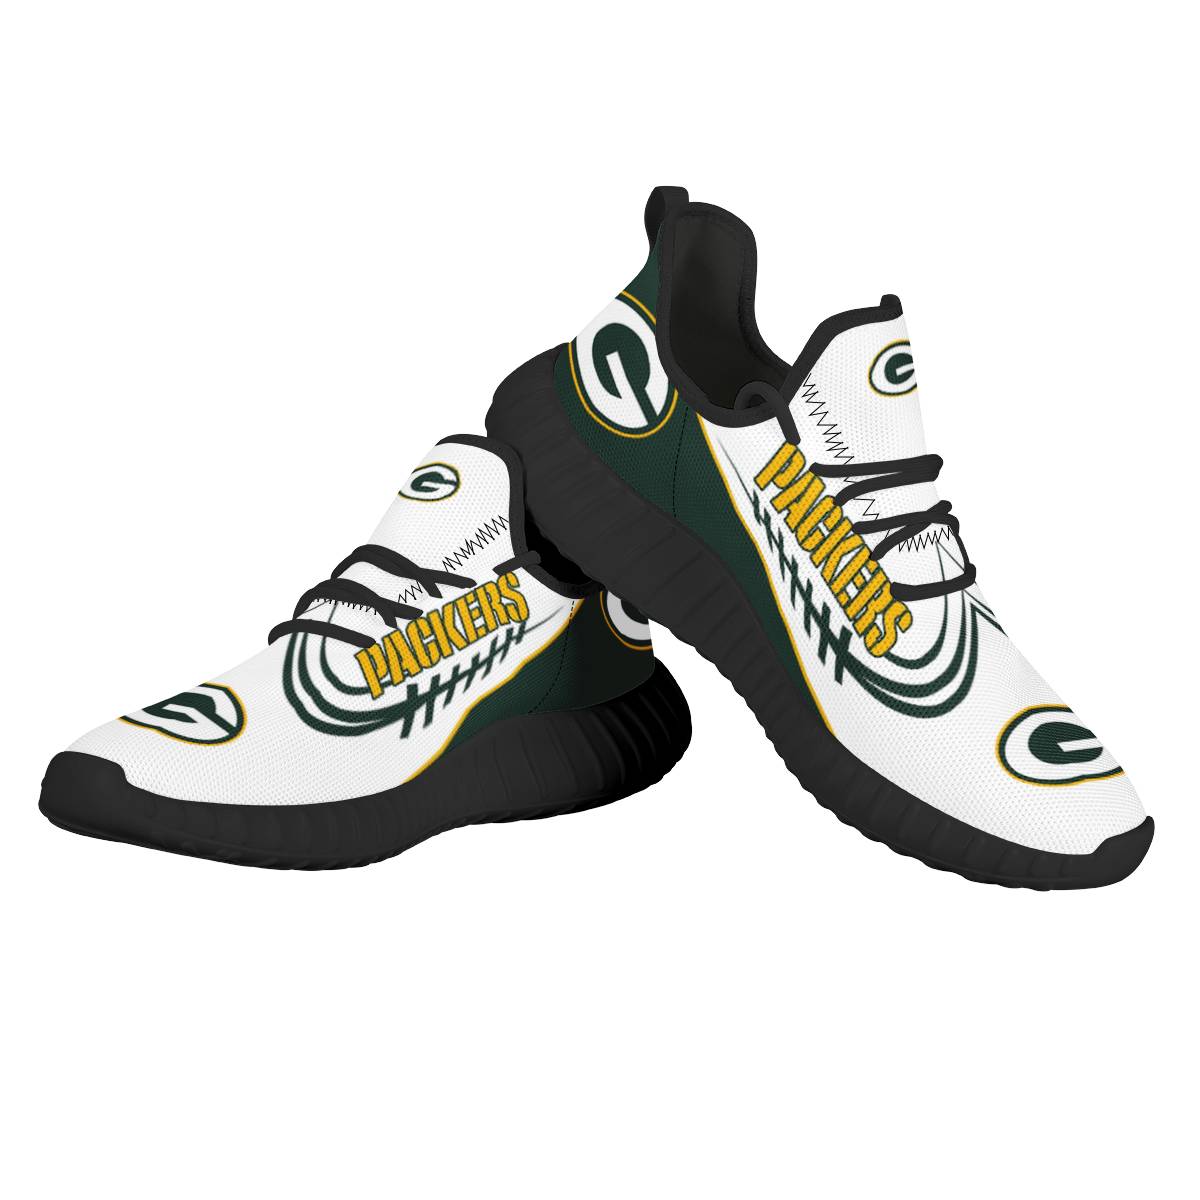 Men's Green Bay Packers Mesh Knit Sneakers/Shoes 009